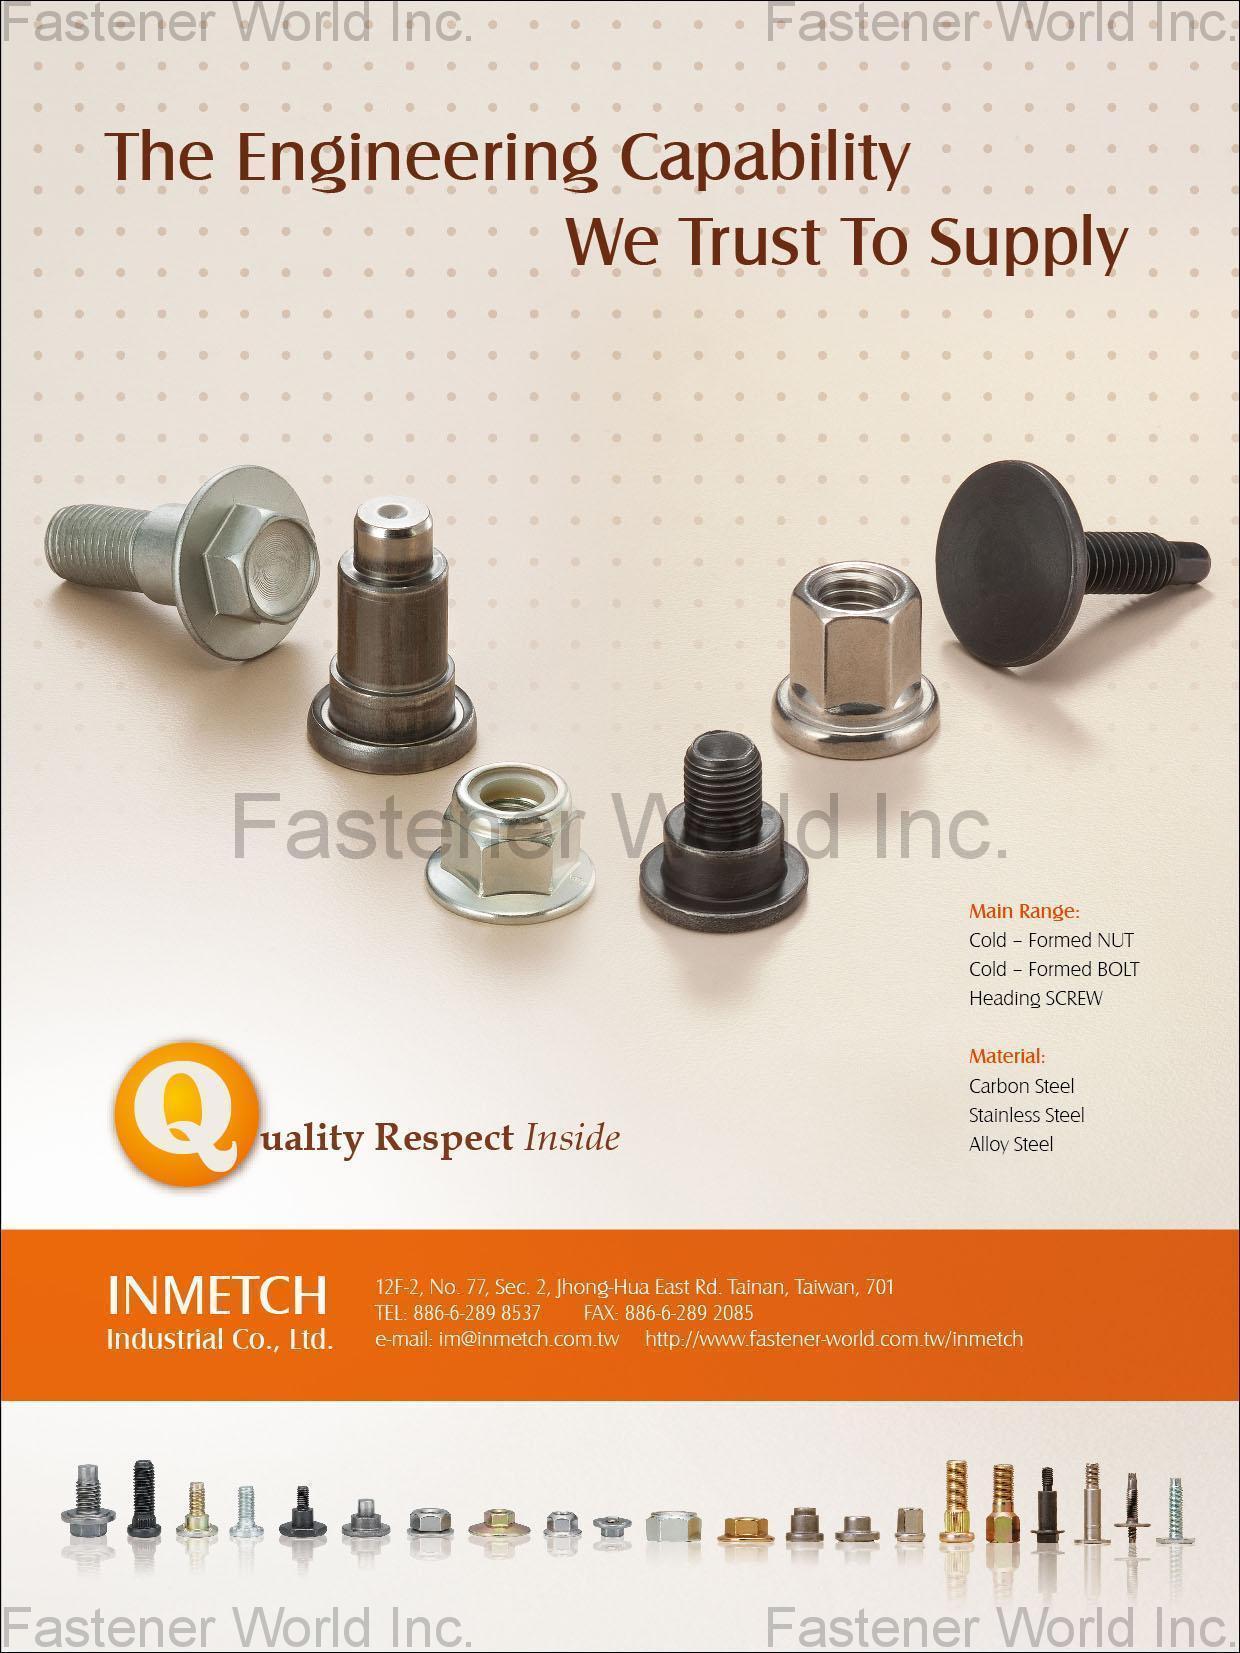 INMETCH INDUSTRIAL CO., LTD.  , External / Internal Thread Fasteners, Cold-Formed Nuts, Cold Formed Bolts, Heading Screws , All Kinds of Screws